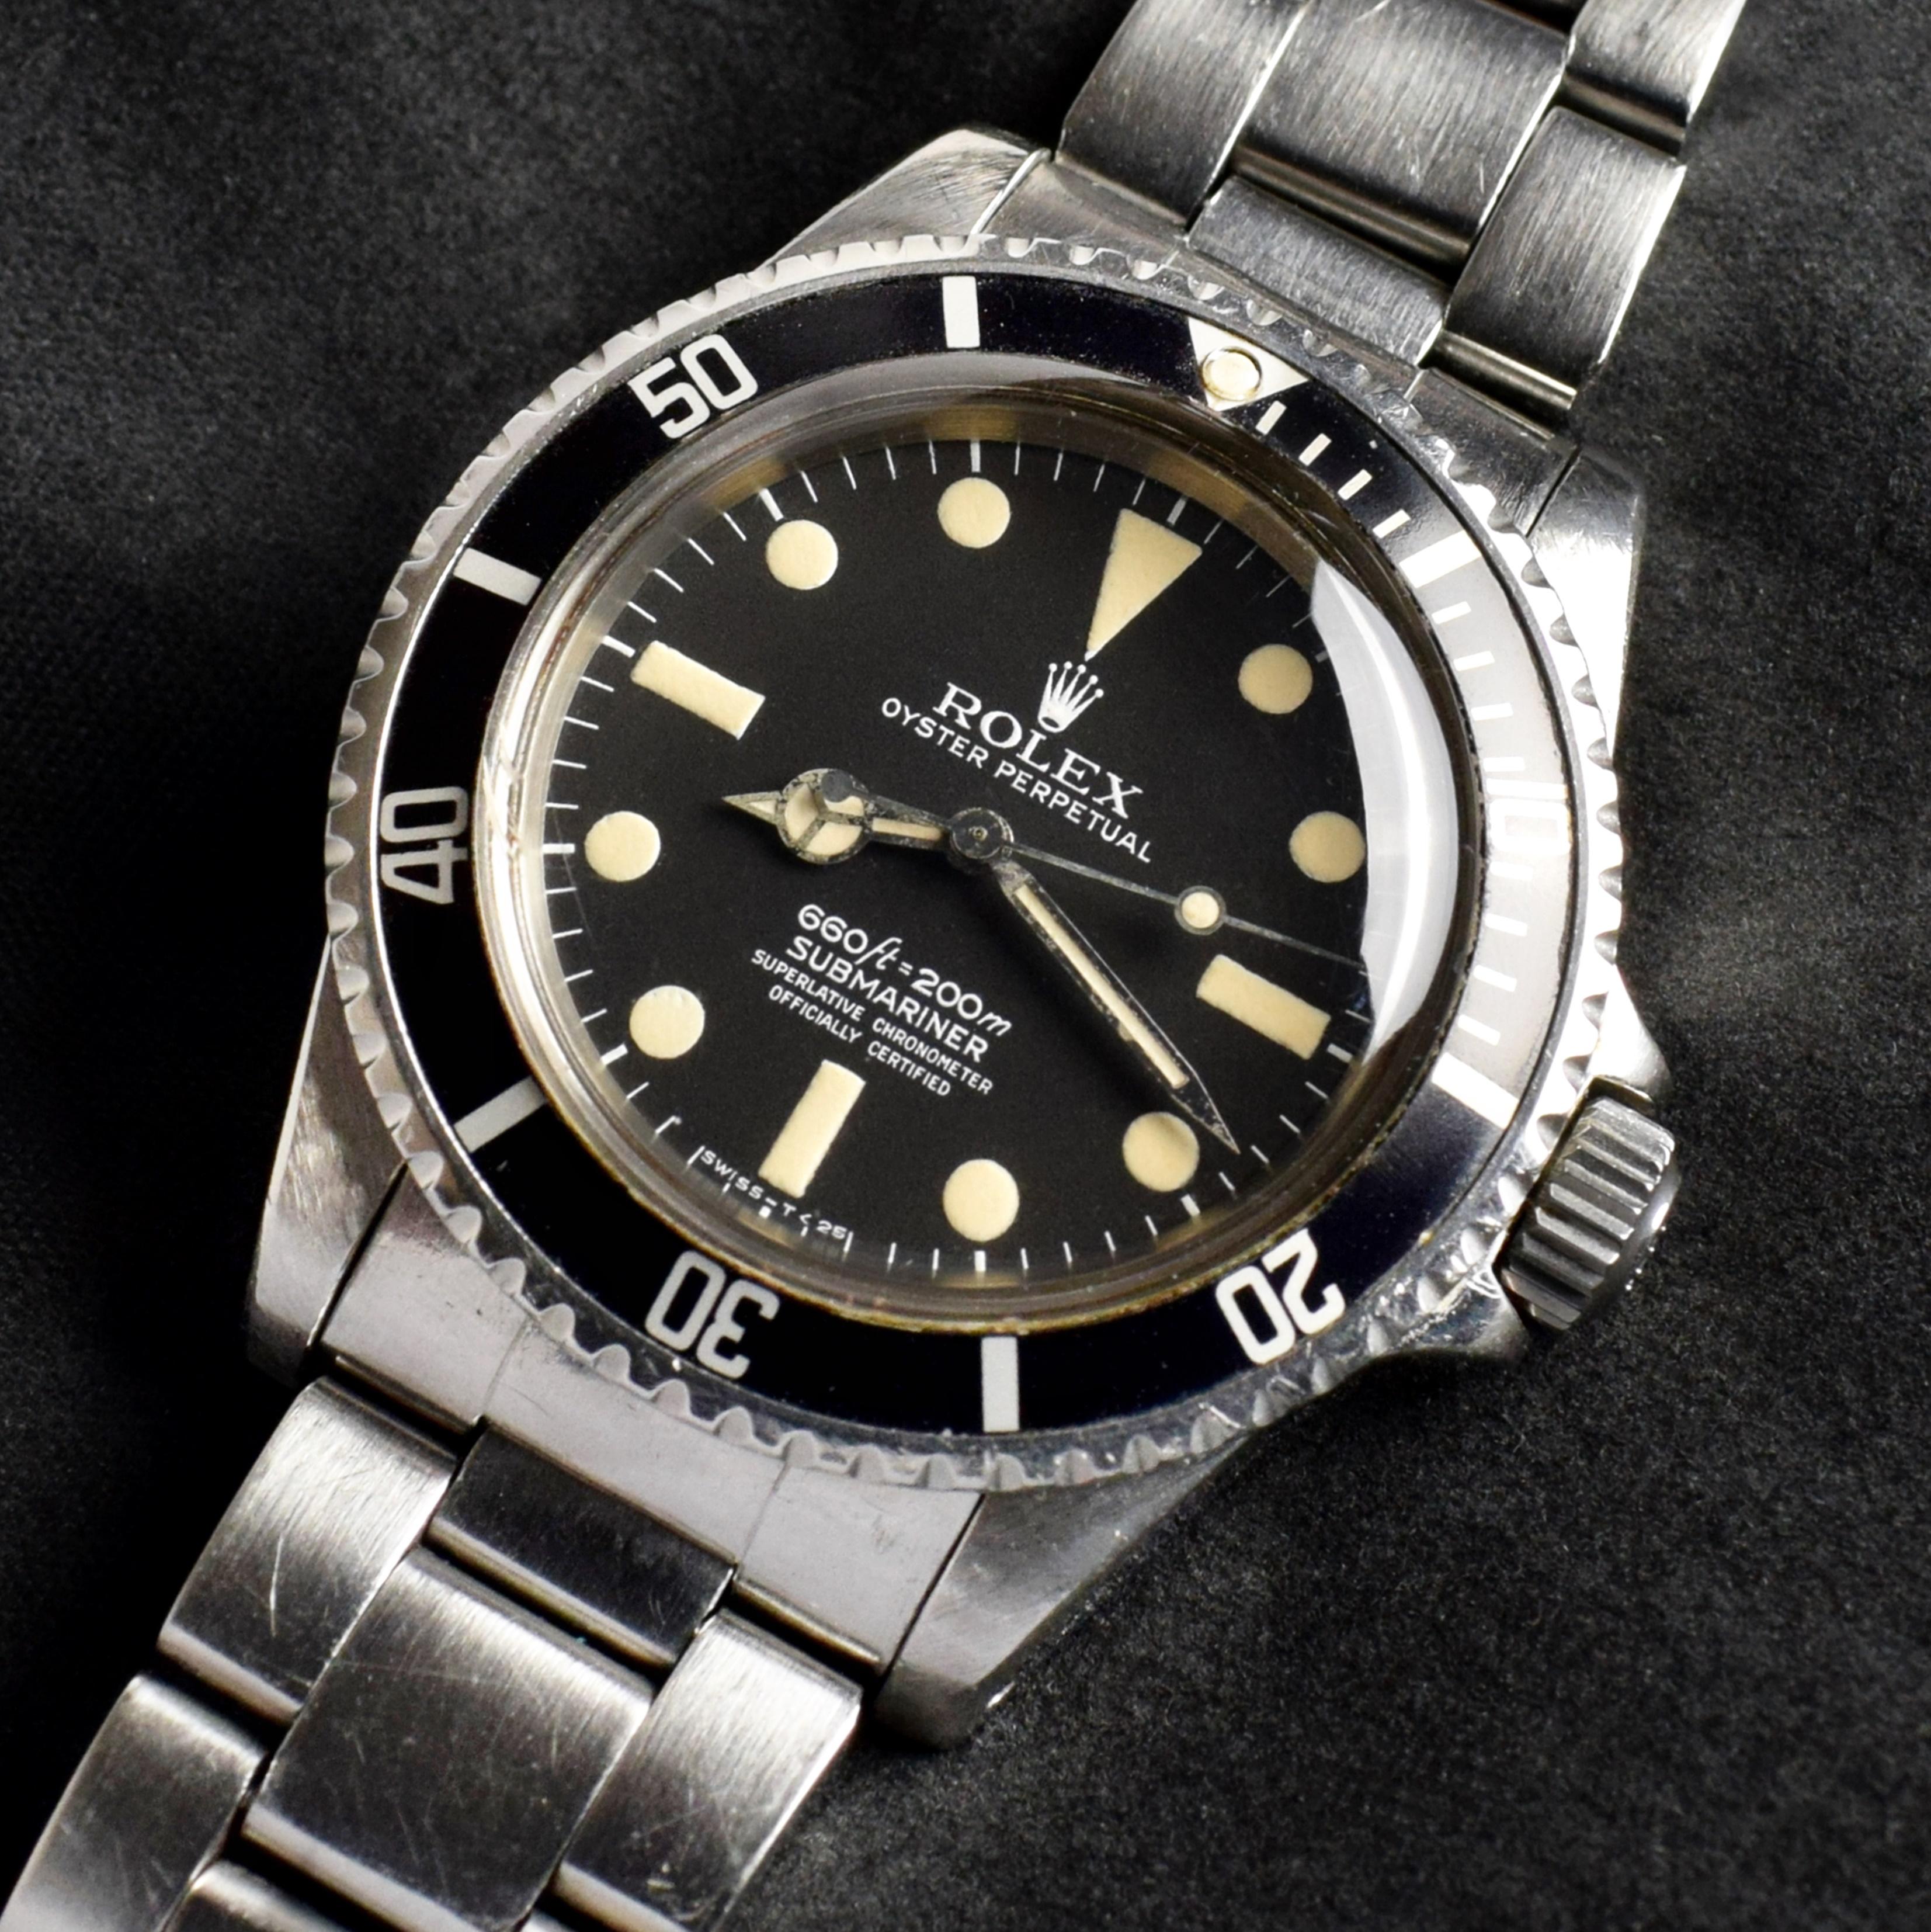 Brand: Vintage Rolex
Model: 5512
Year: 1977
Serial number: 52xxxxx
Reference: OT1476

Case: Show sign of wear with slight polish from previous w/ 5513 stamped on inner case back

Dial: Excellent Clean Condition Black Tritium Dial where the lumes